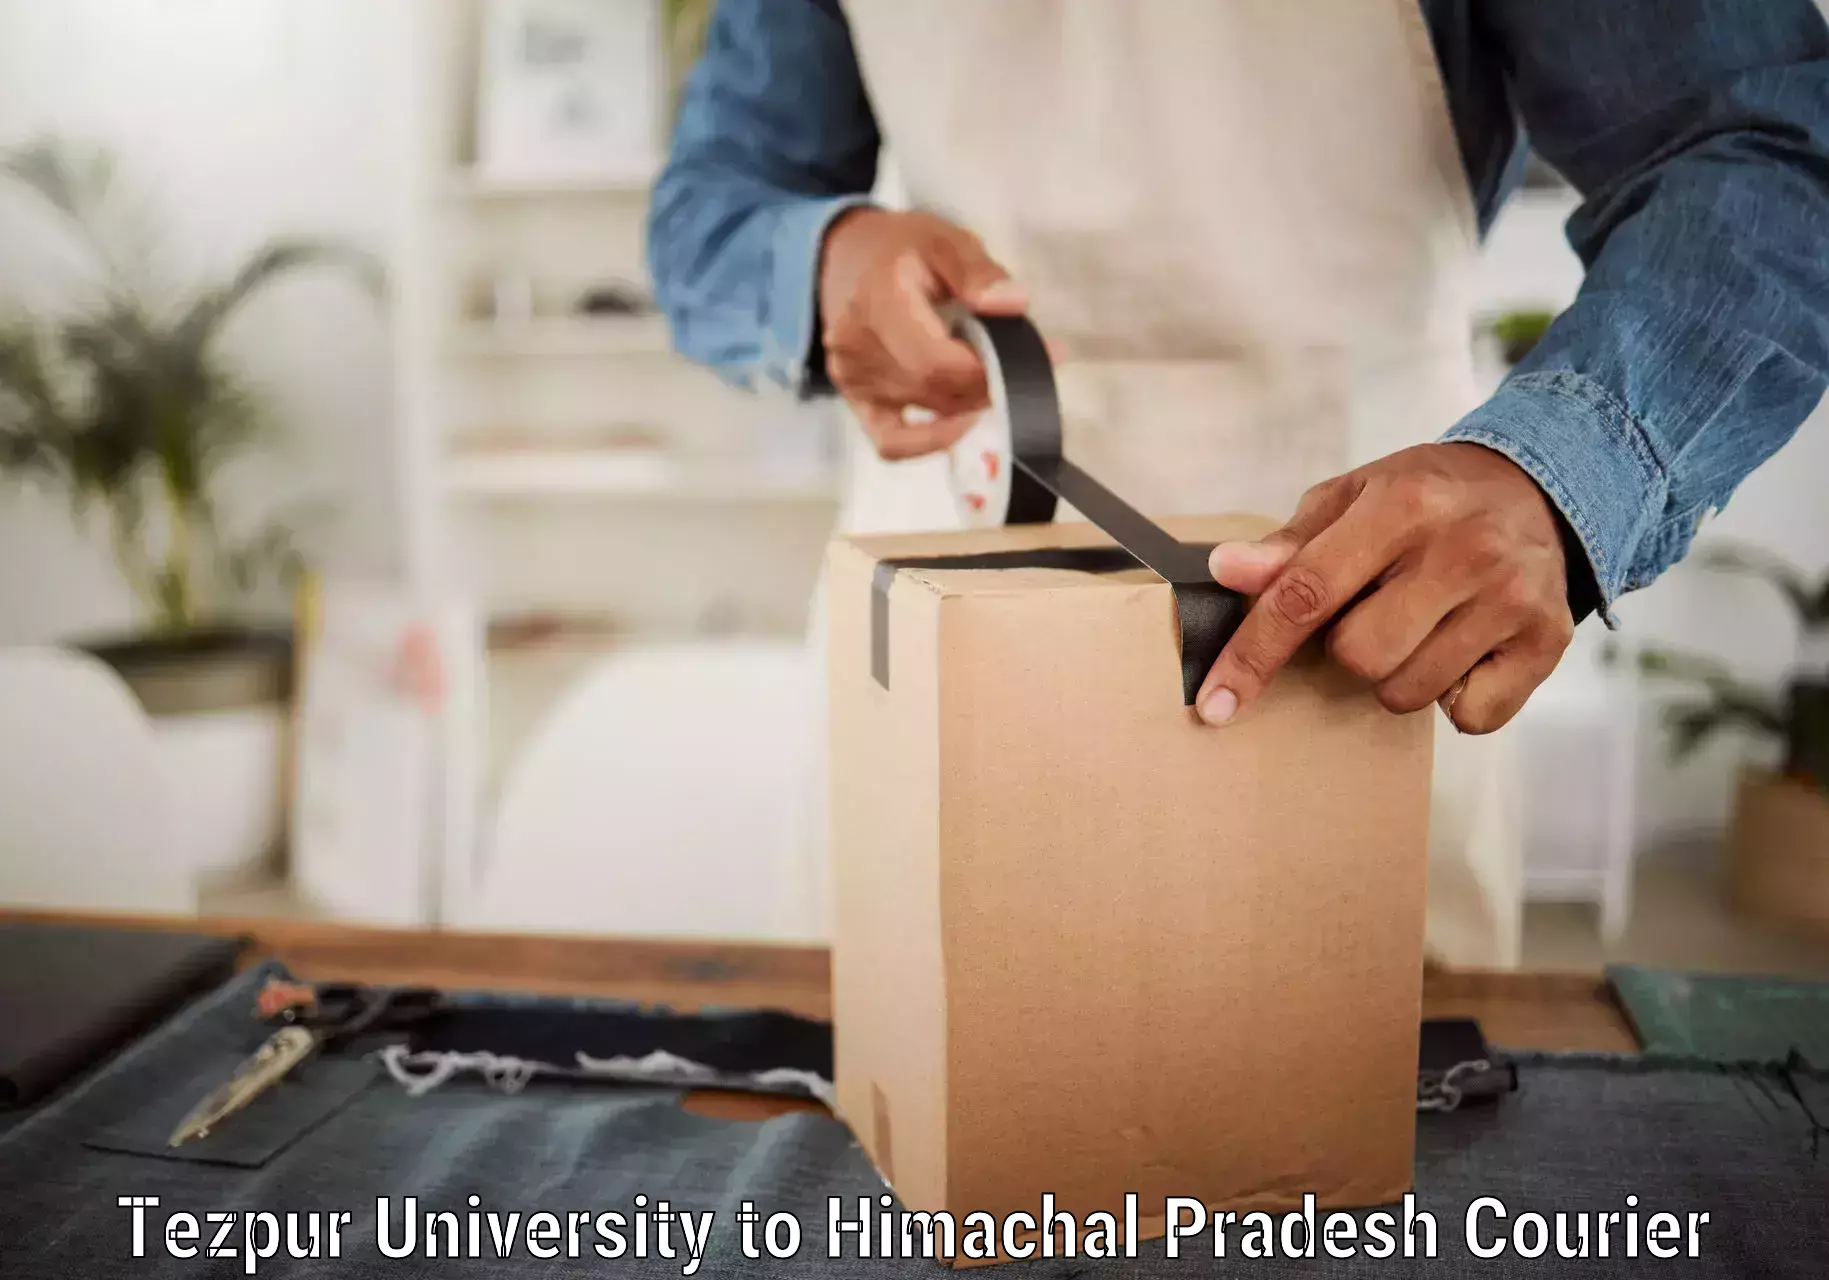 Expedited parcel delivery Tezpur University to Himachal Pradesh